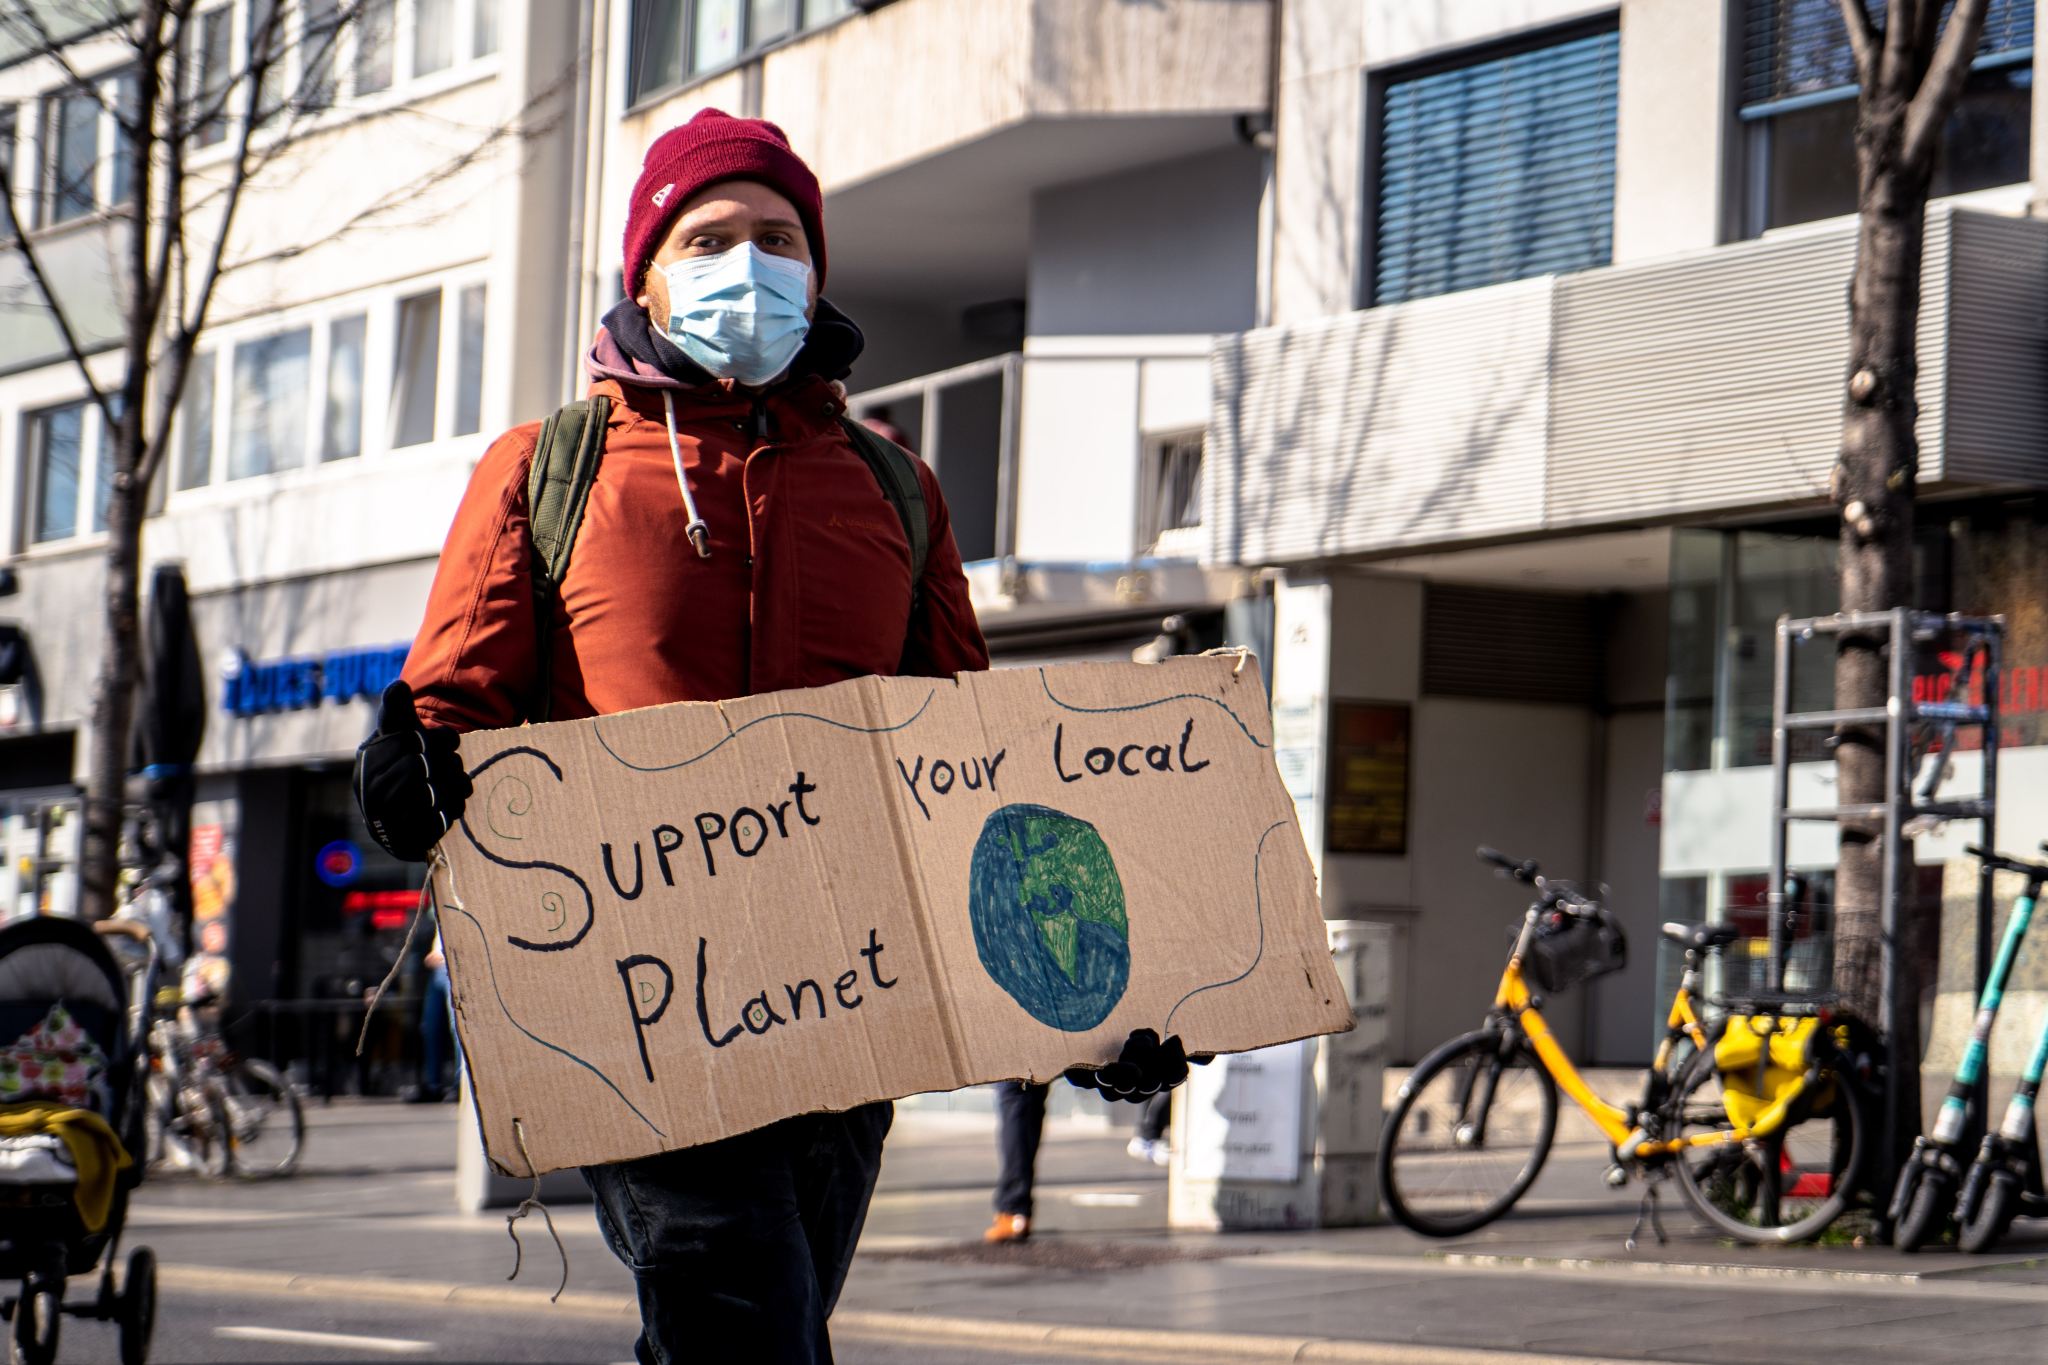 A man bears a placard calling for climate change action